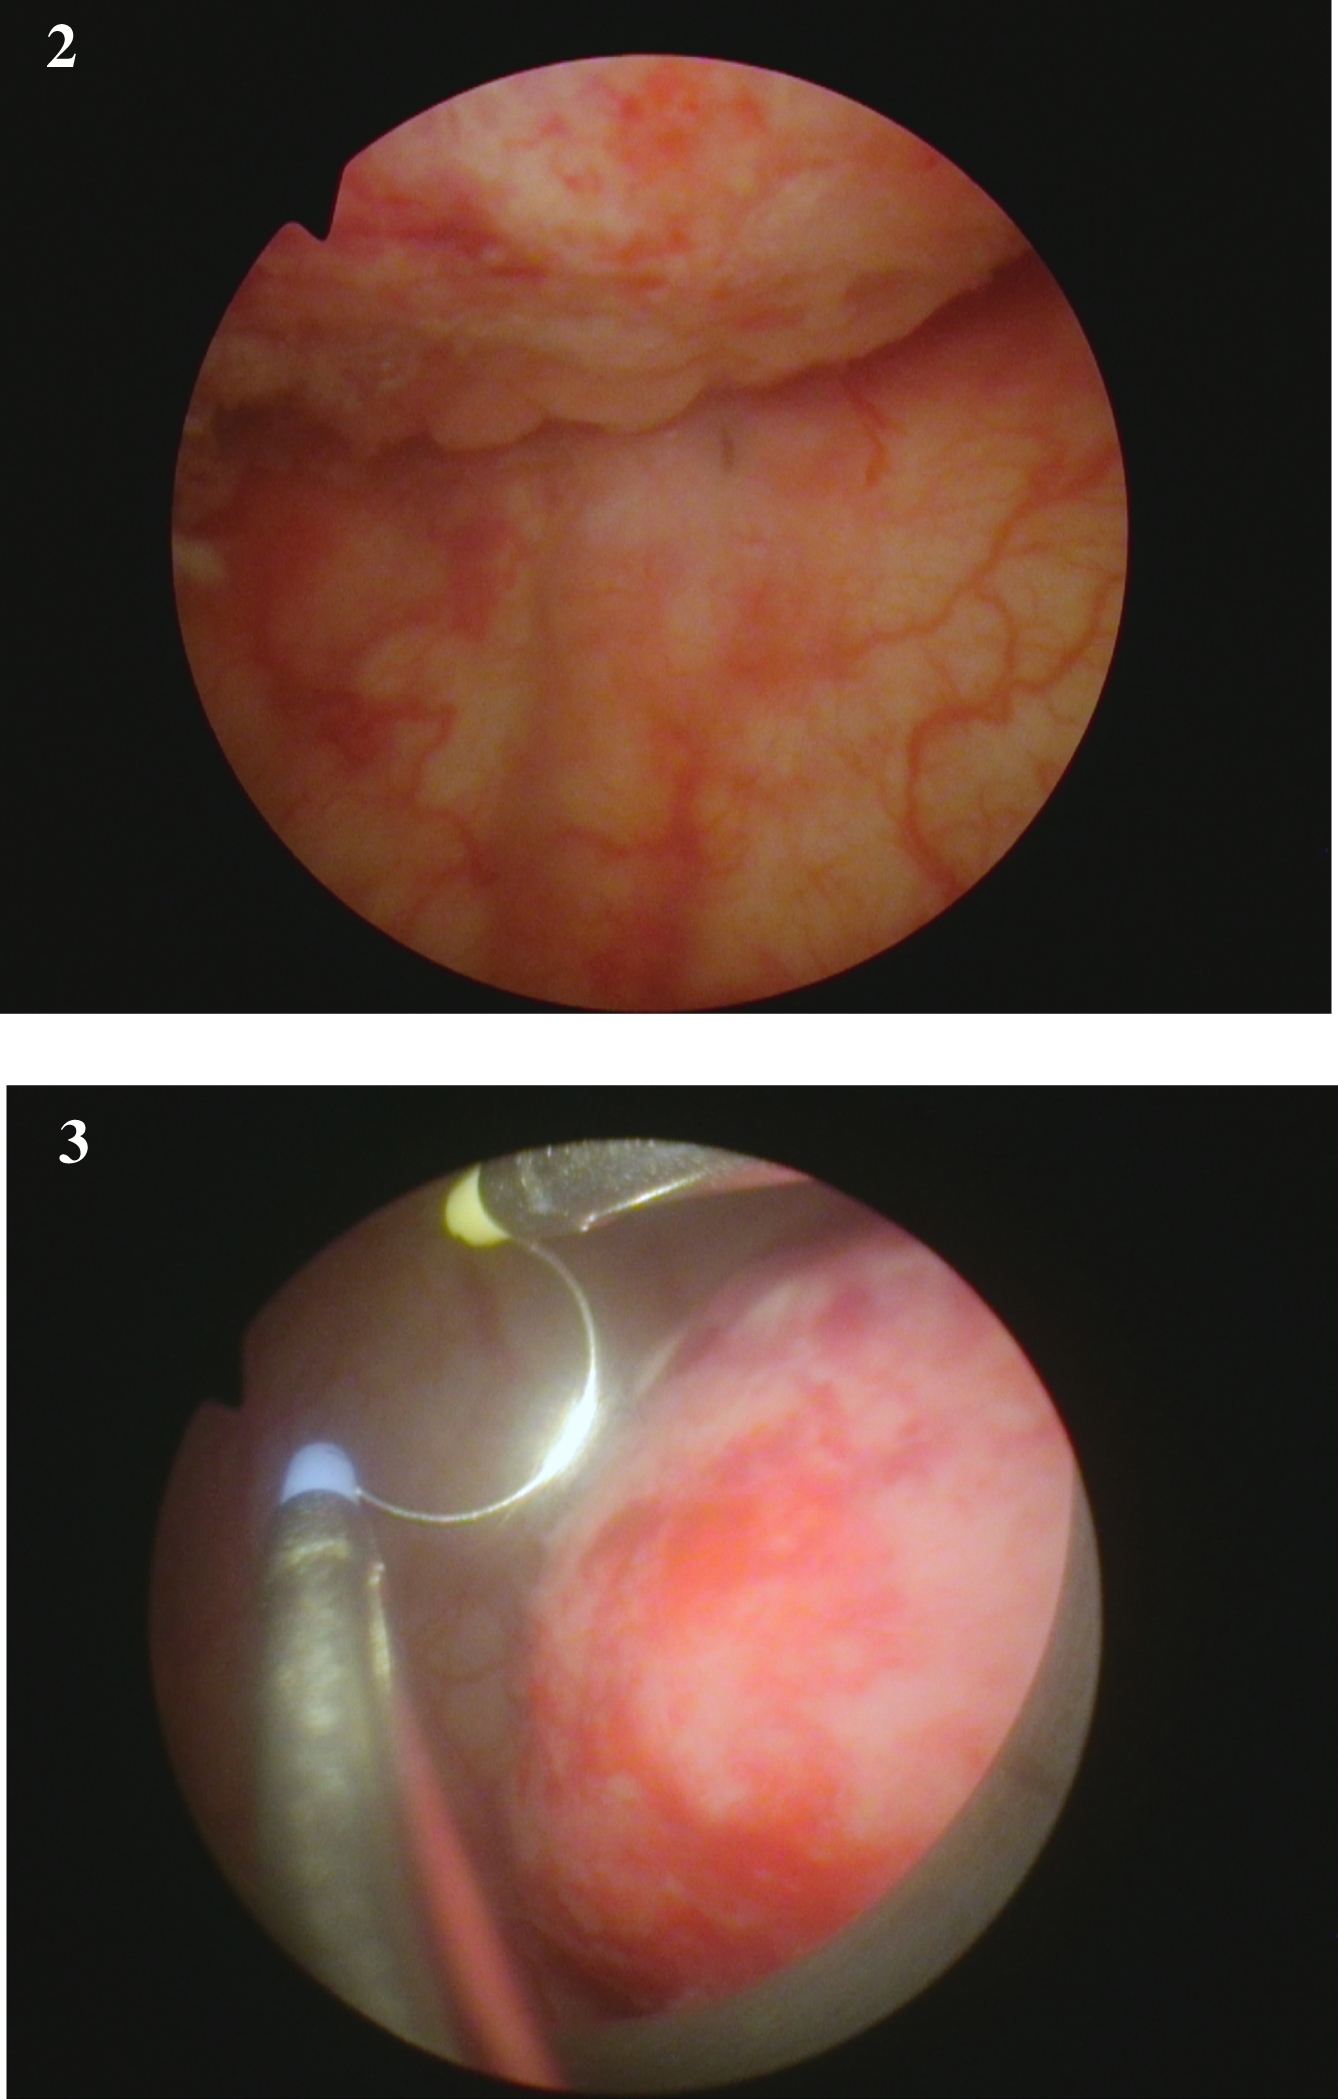 Endoscopic appearance of the large solid appearing tumor and the loop to provide an idea of the size.